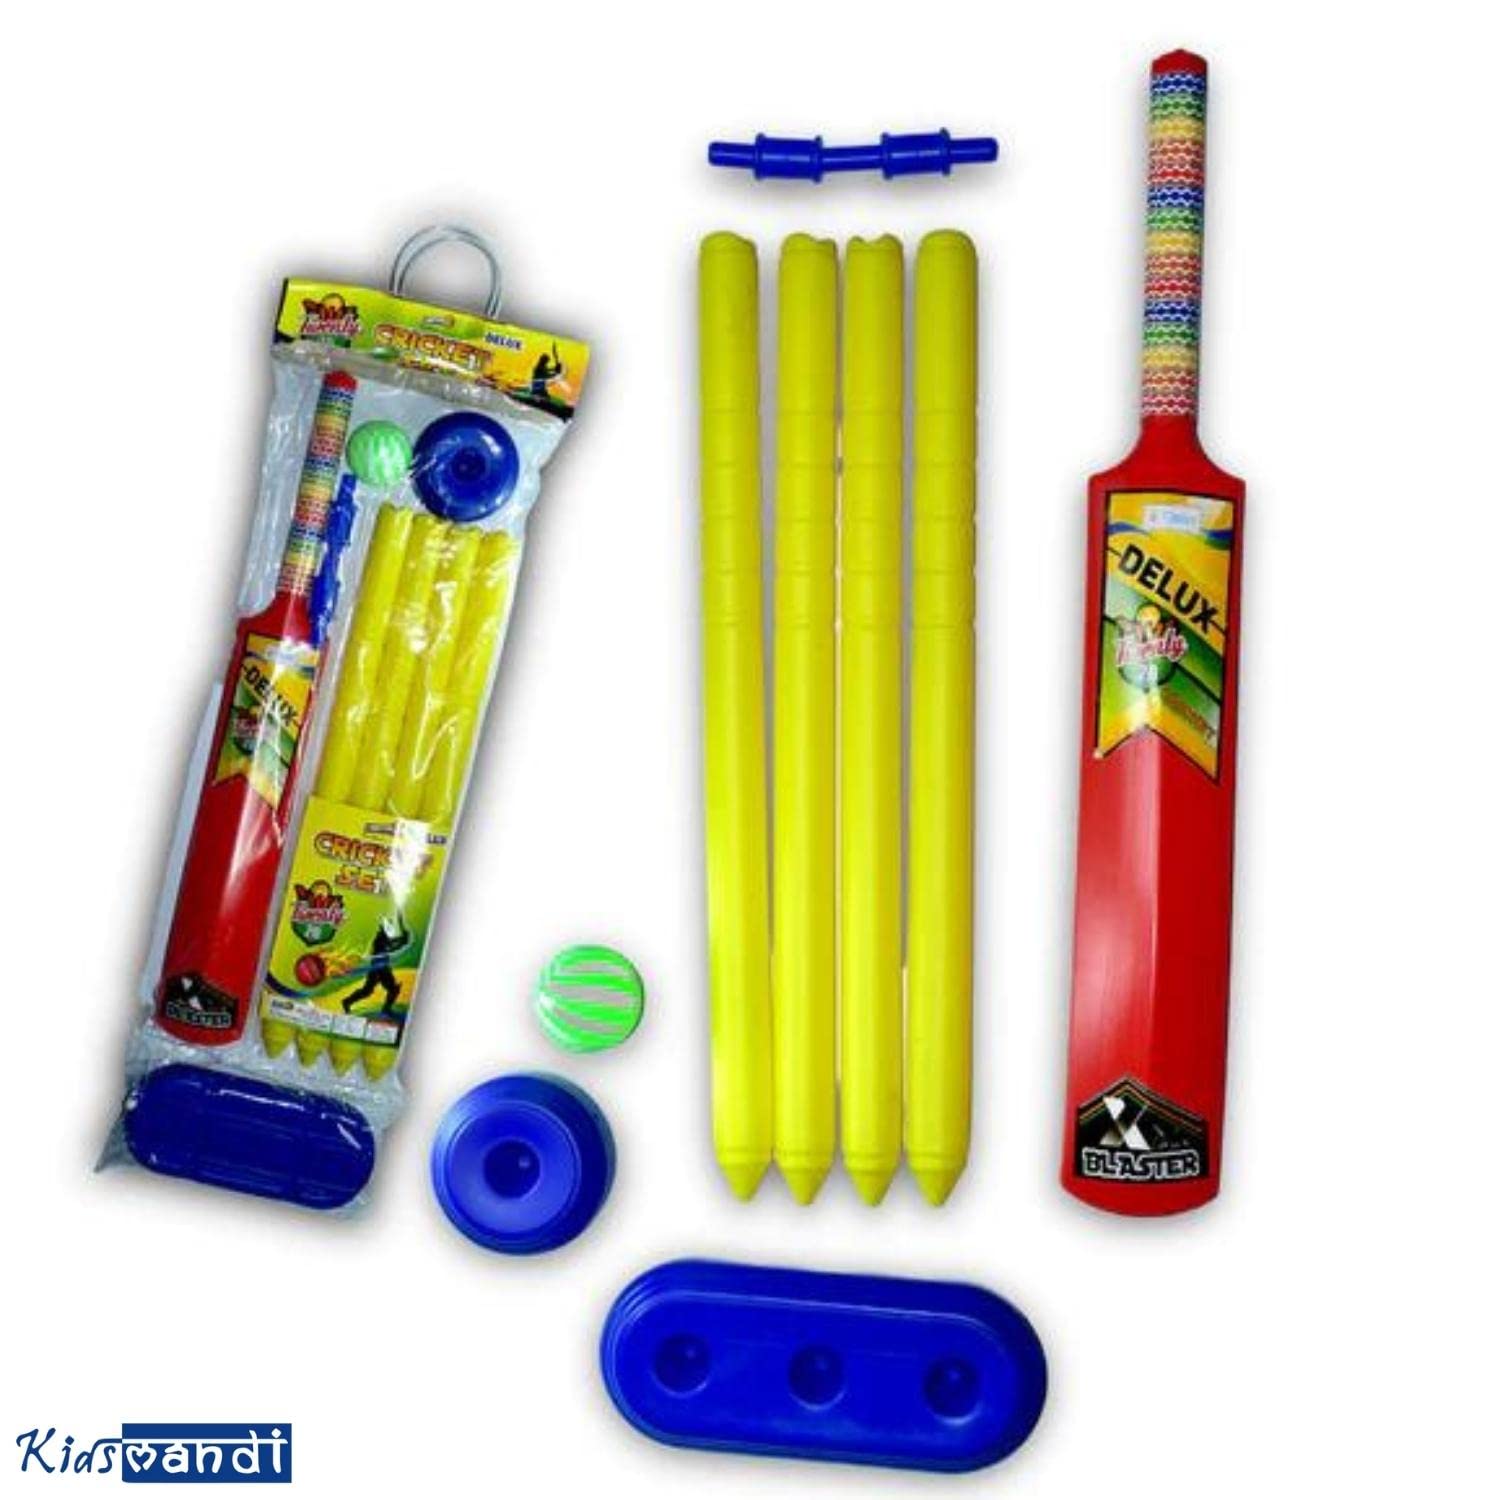 Kids Mandi lightweight bat, ball, and hockey combo. Ideal for indoor/outdoor play. Non-toxic, child-safe. Great gift for boys/girls. Color may vary.